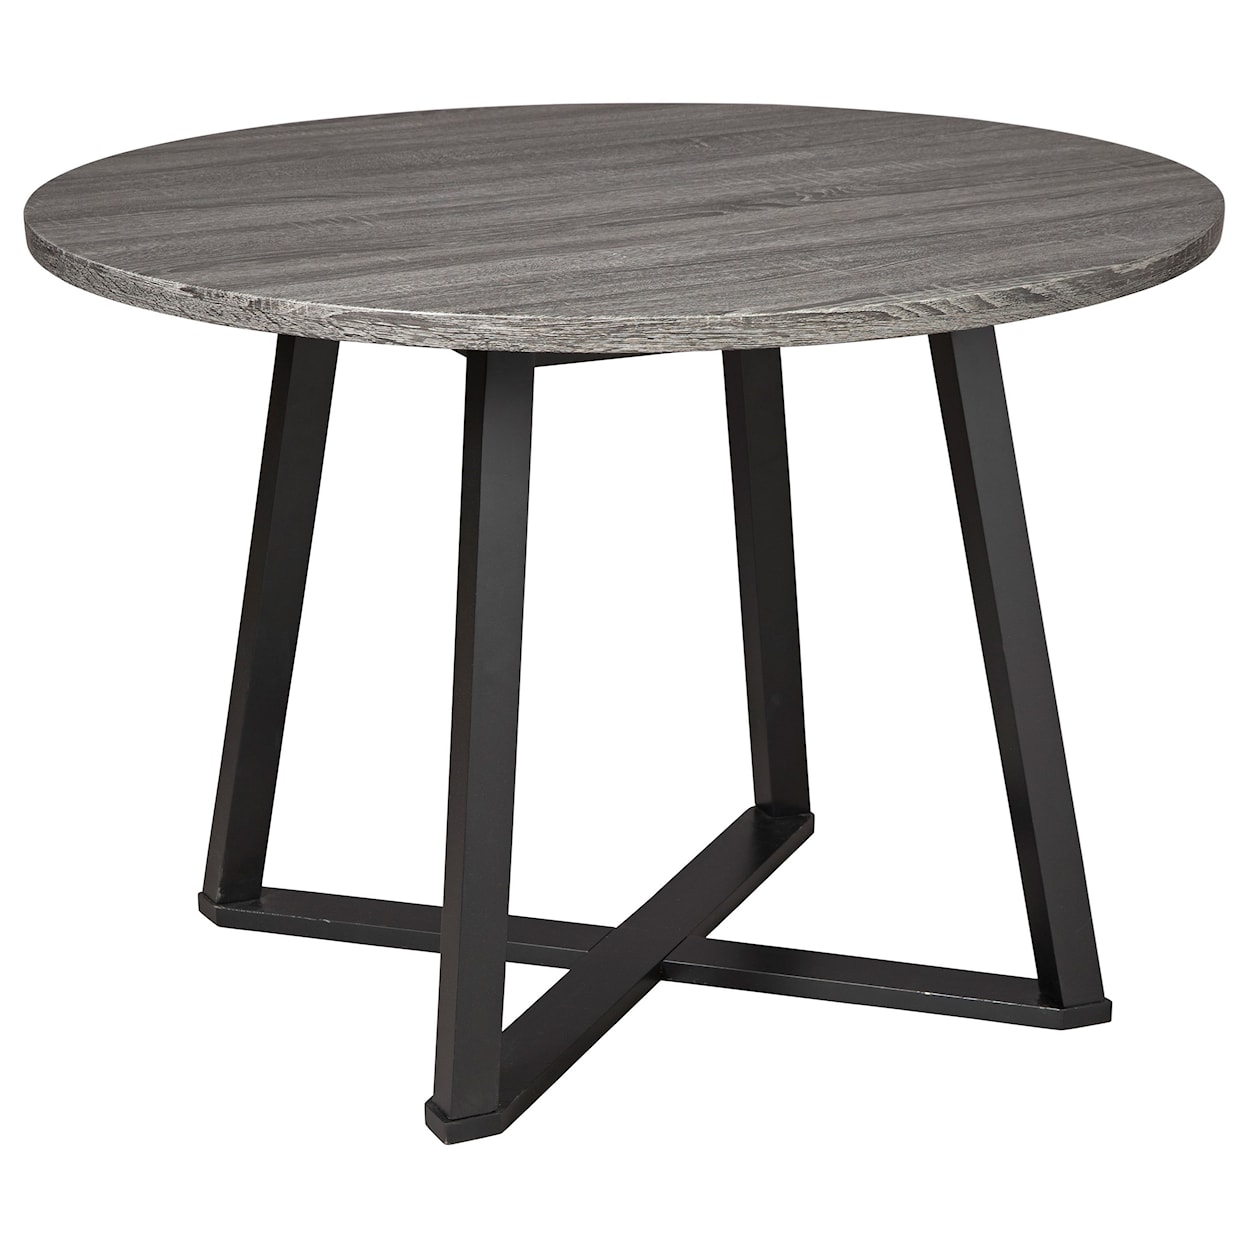 Benchcraft Centiar Round Dining Room Table